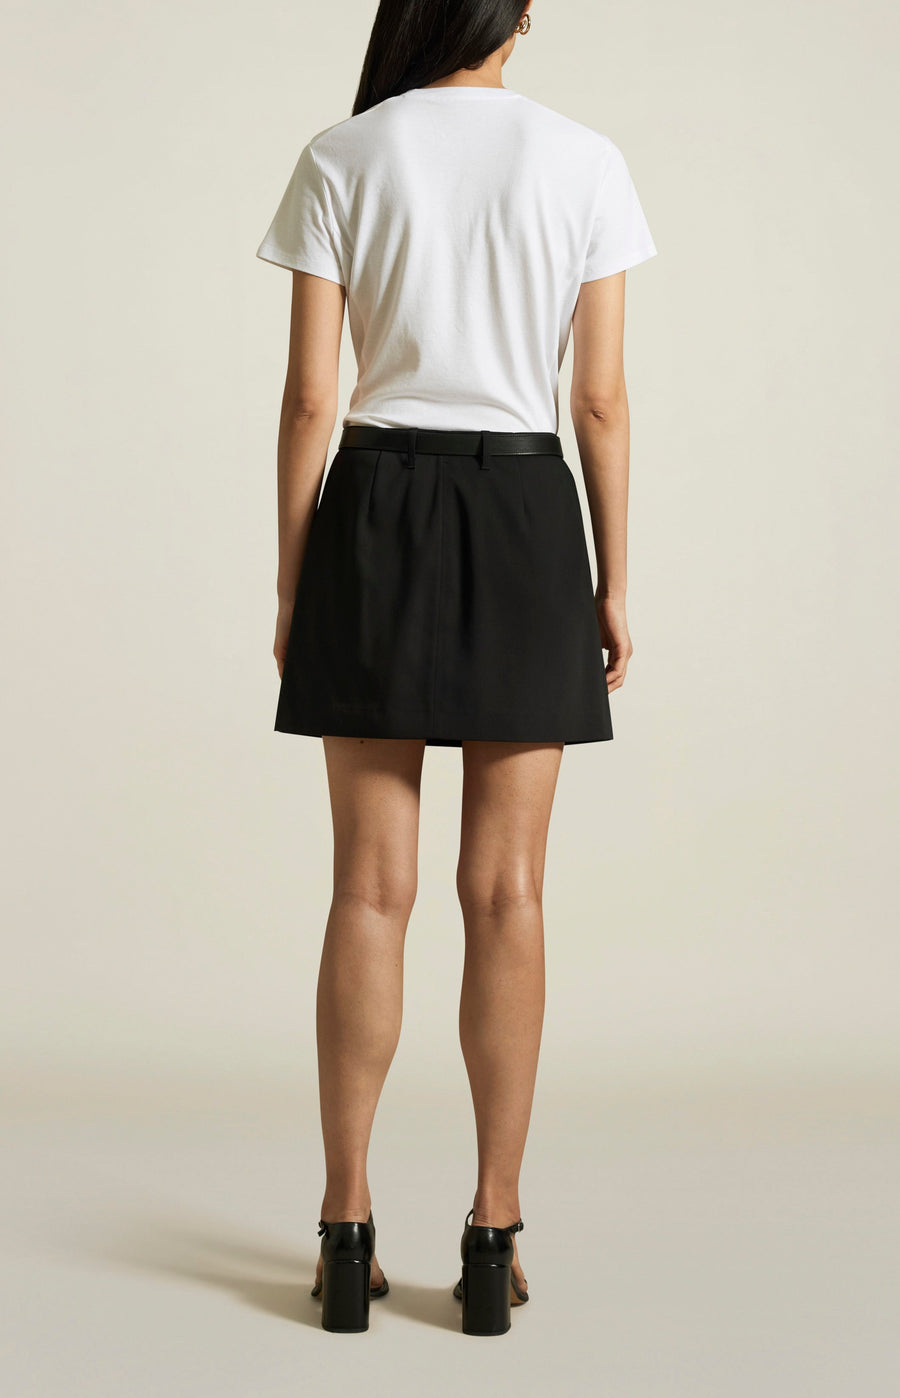 Knox Patch Pocket Mini Skirt in Black Stretch Suiting